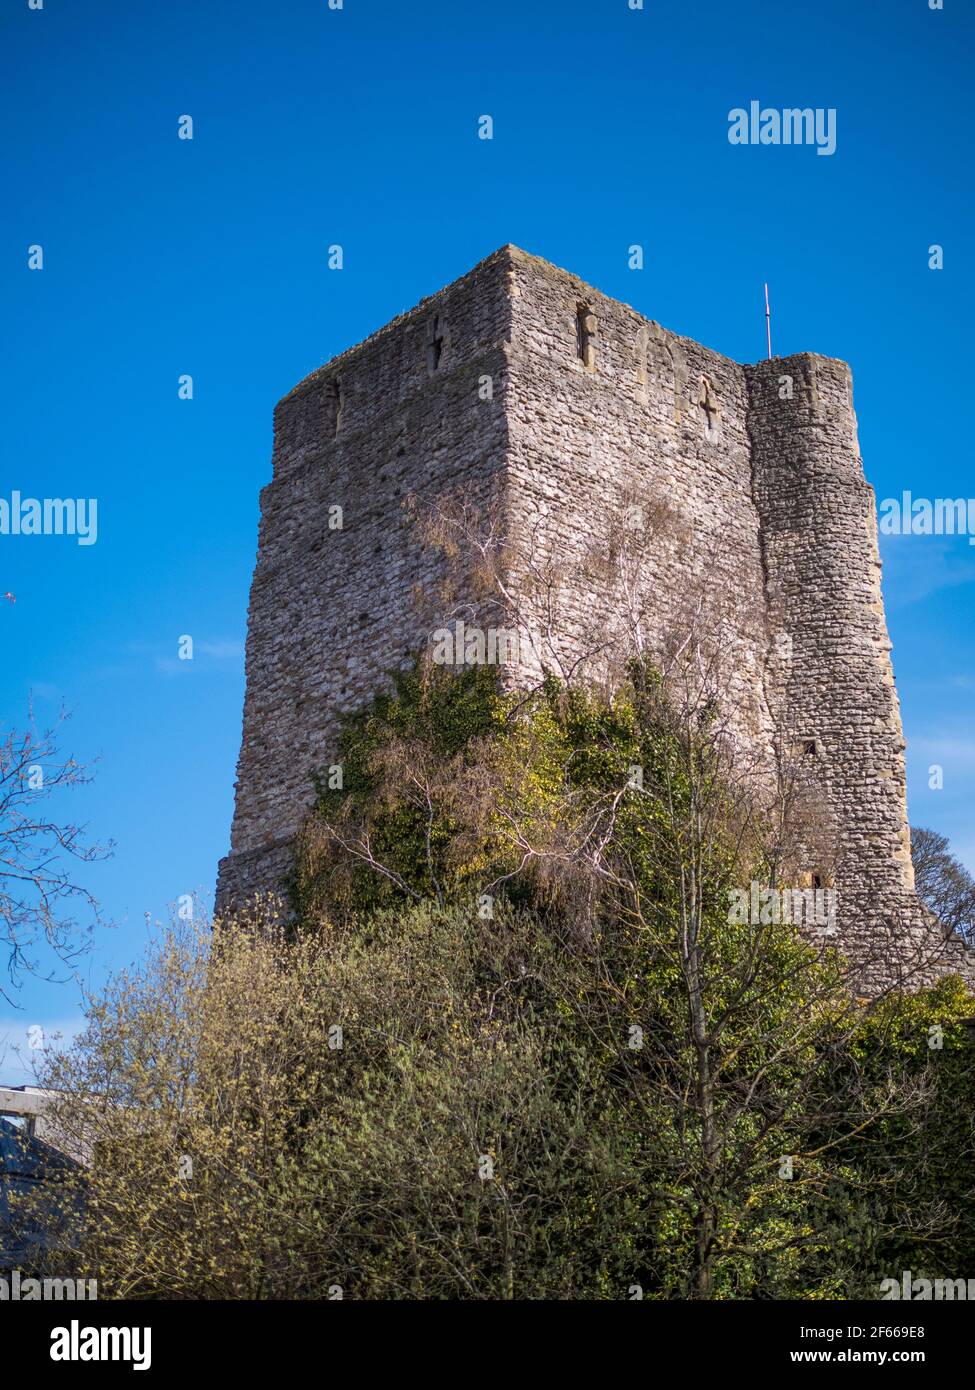 Saint George's Tower, Oxford Castle, Oxford, Angleterre, Royaume-Uni, GO. Banque D'Images